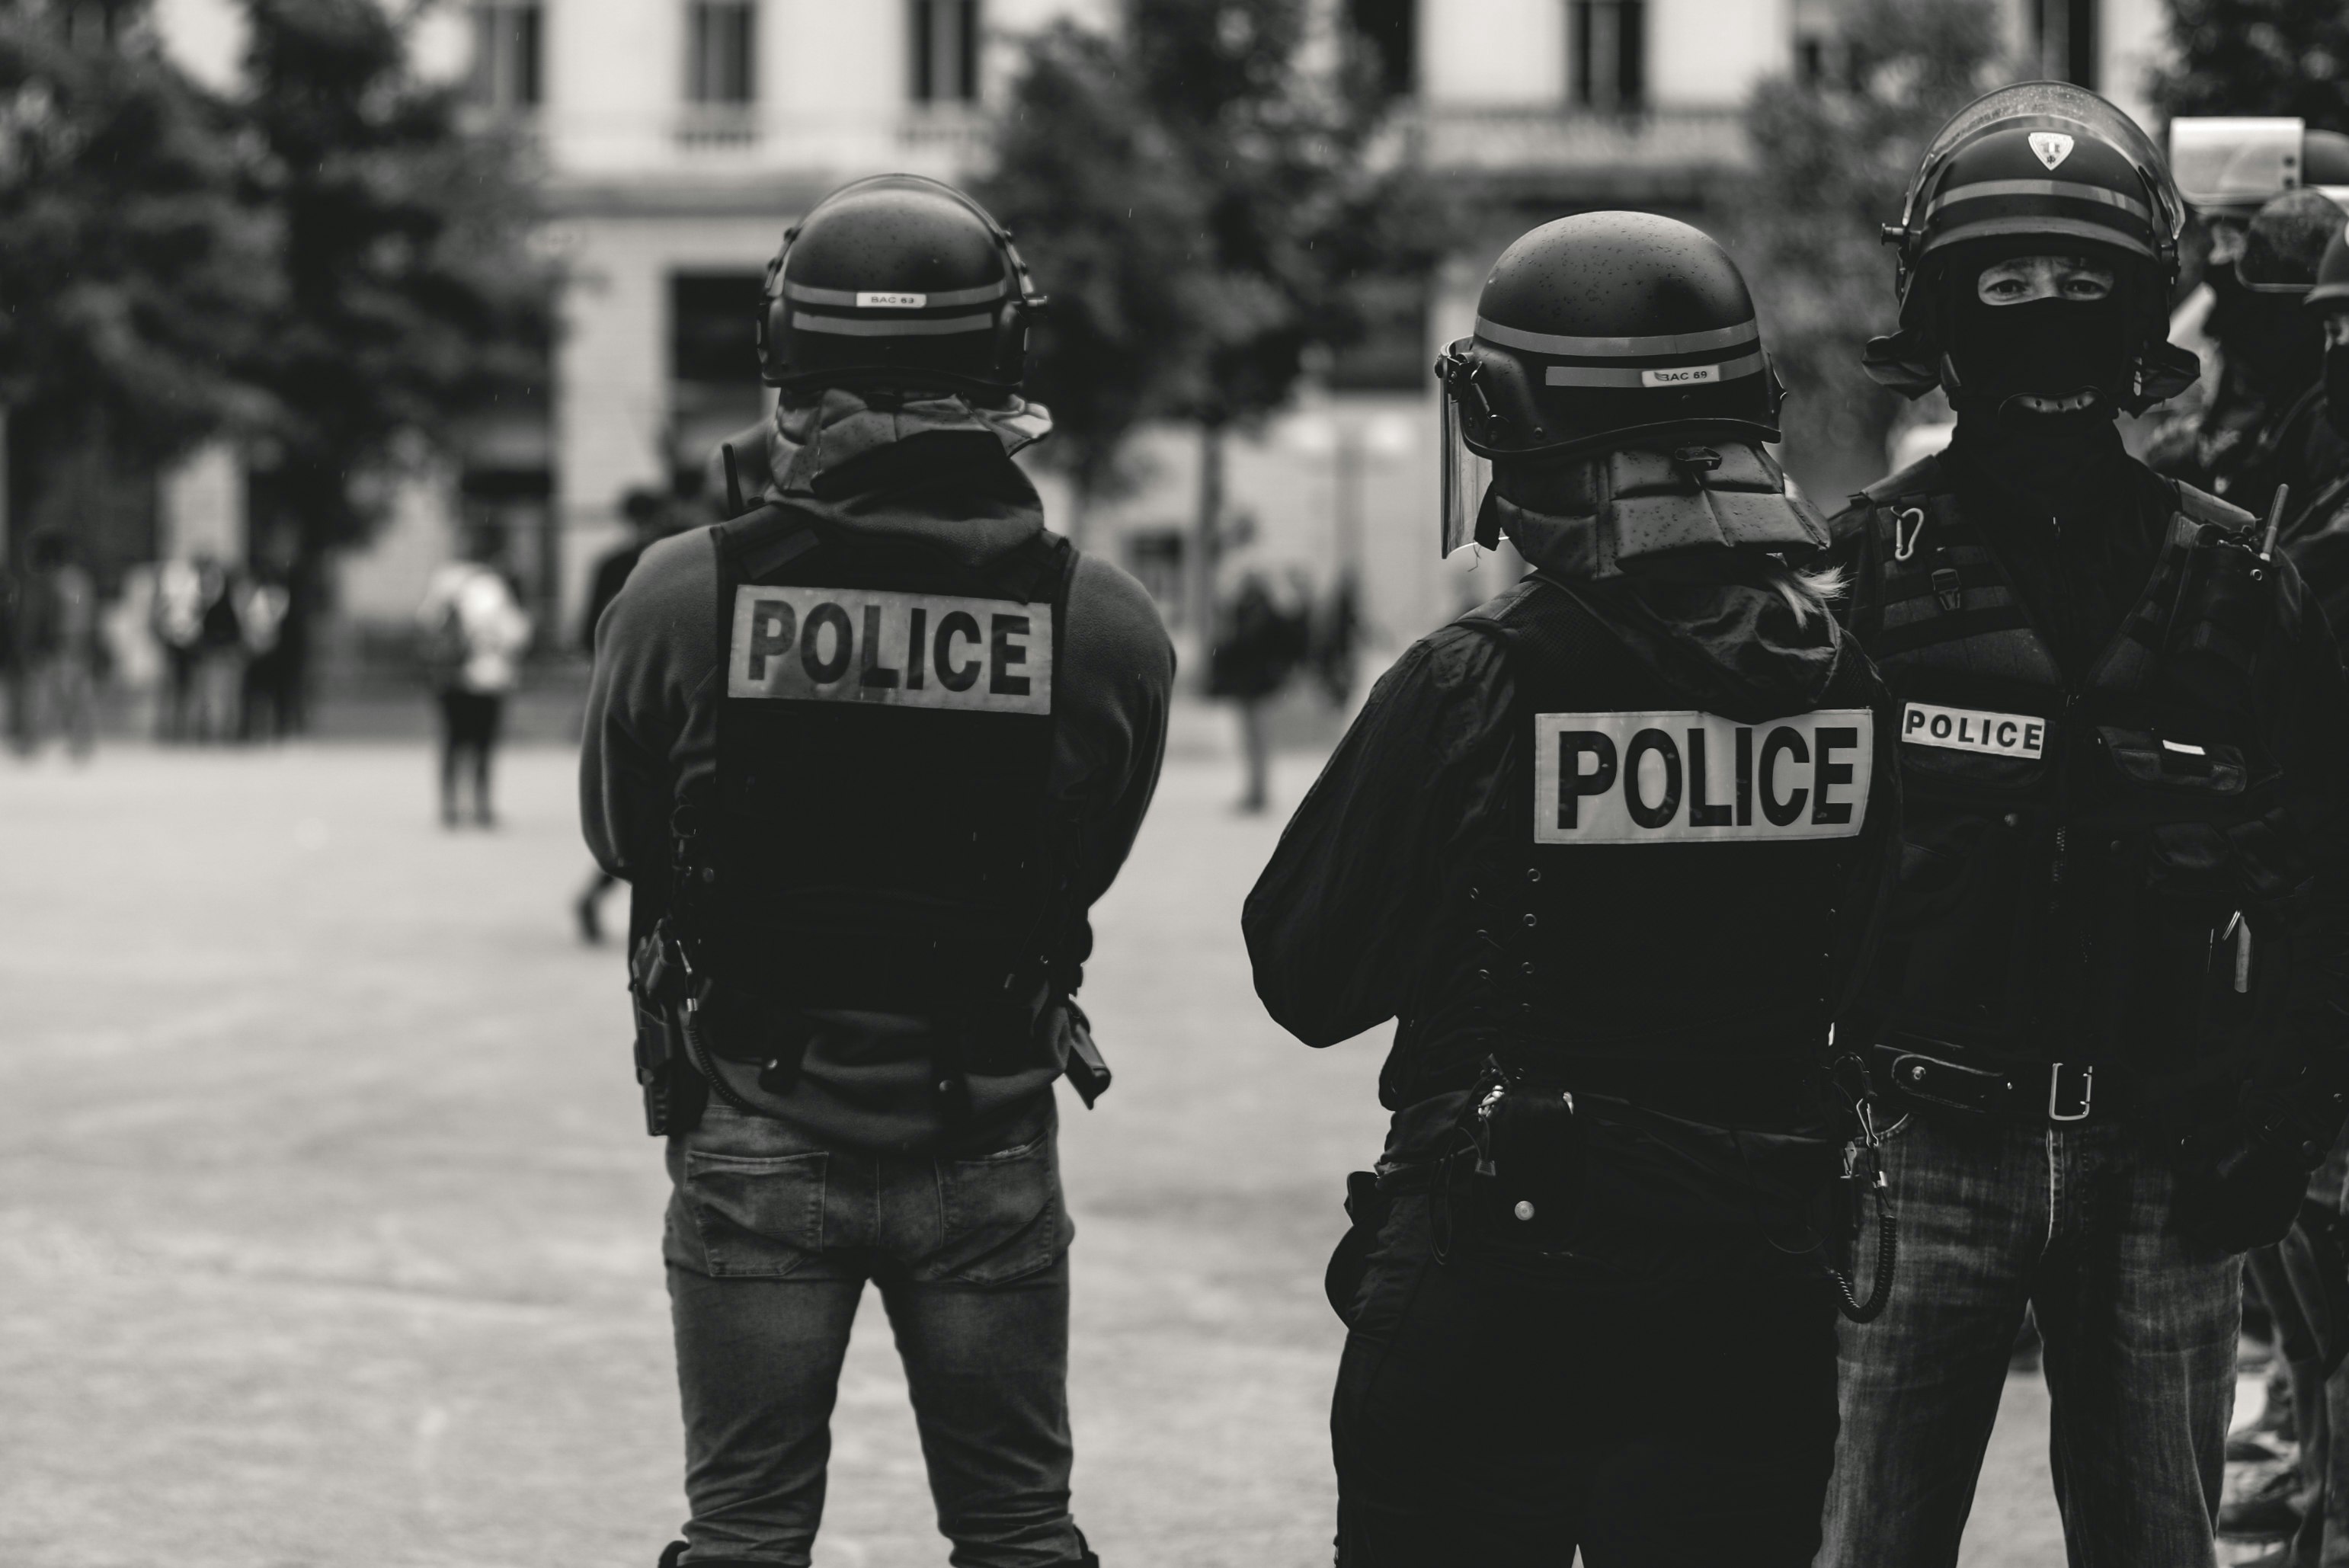 High police presence in Lyon, France, during the 25th weekend of the yellow vests movement.

Police violence is at its highest since the 1950s. As of now, 23 protestors and bystanders have lost an eye and 5 persons their hand (source: mediapart.fr, http://tiny.cc/6hd85y)
Recently an independant journalist, got arrested (https://twitter.com/GaspardGlanz).
Violence continues, even though Amnesty International and the UN condemn the use of excessive force against protesters (source: amnesty.org, http://tiny.cc/3jd85y).